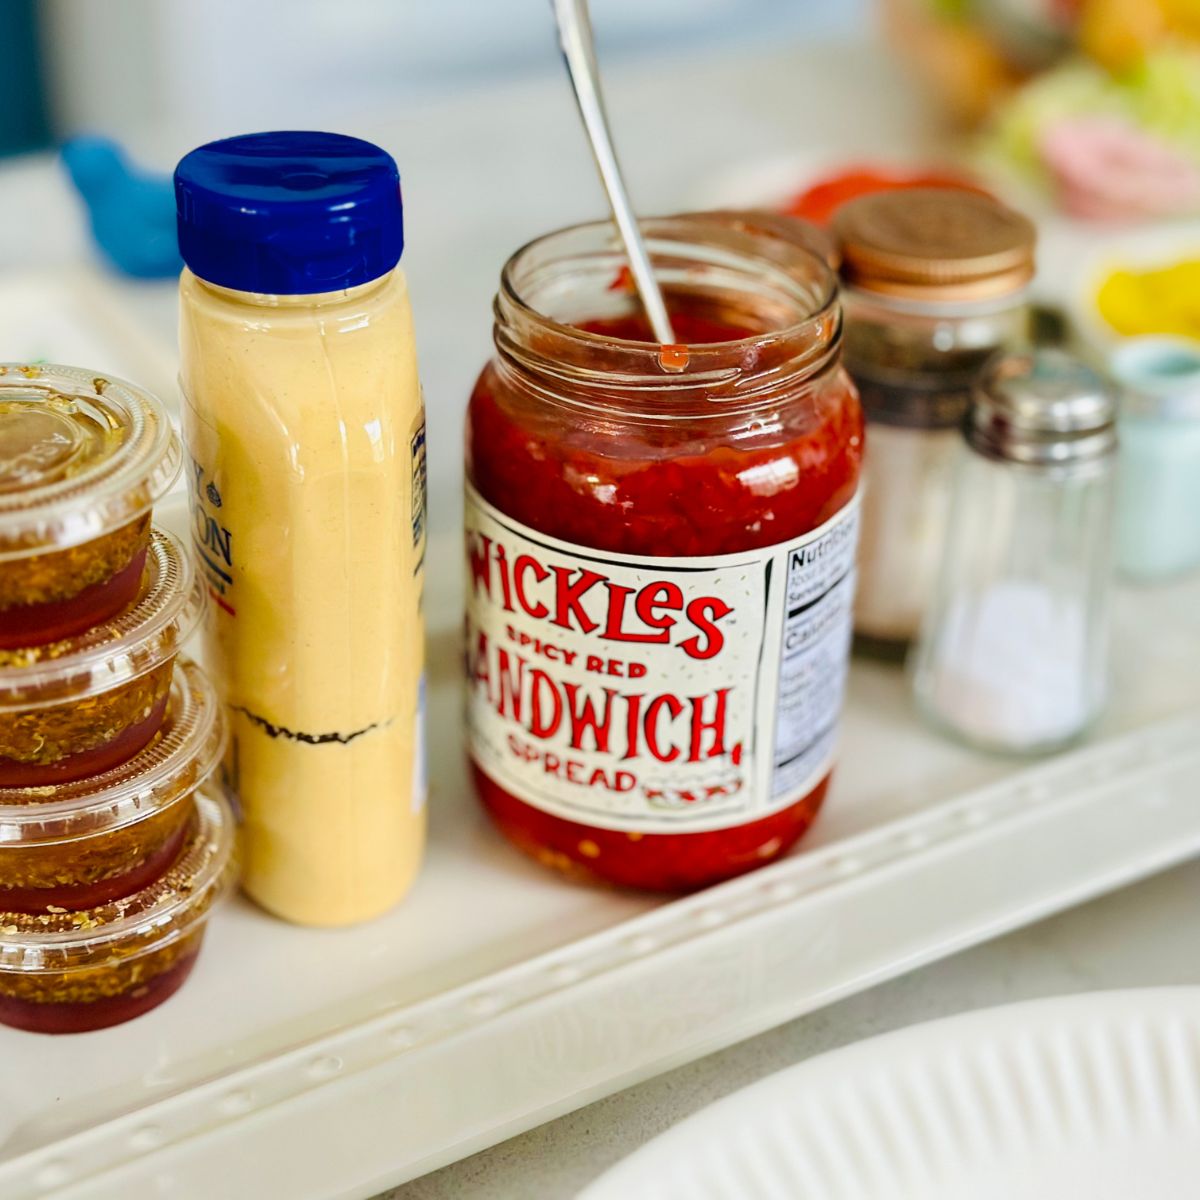 A tray of mustard, relish, and more.